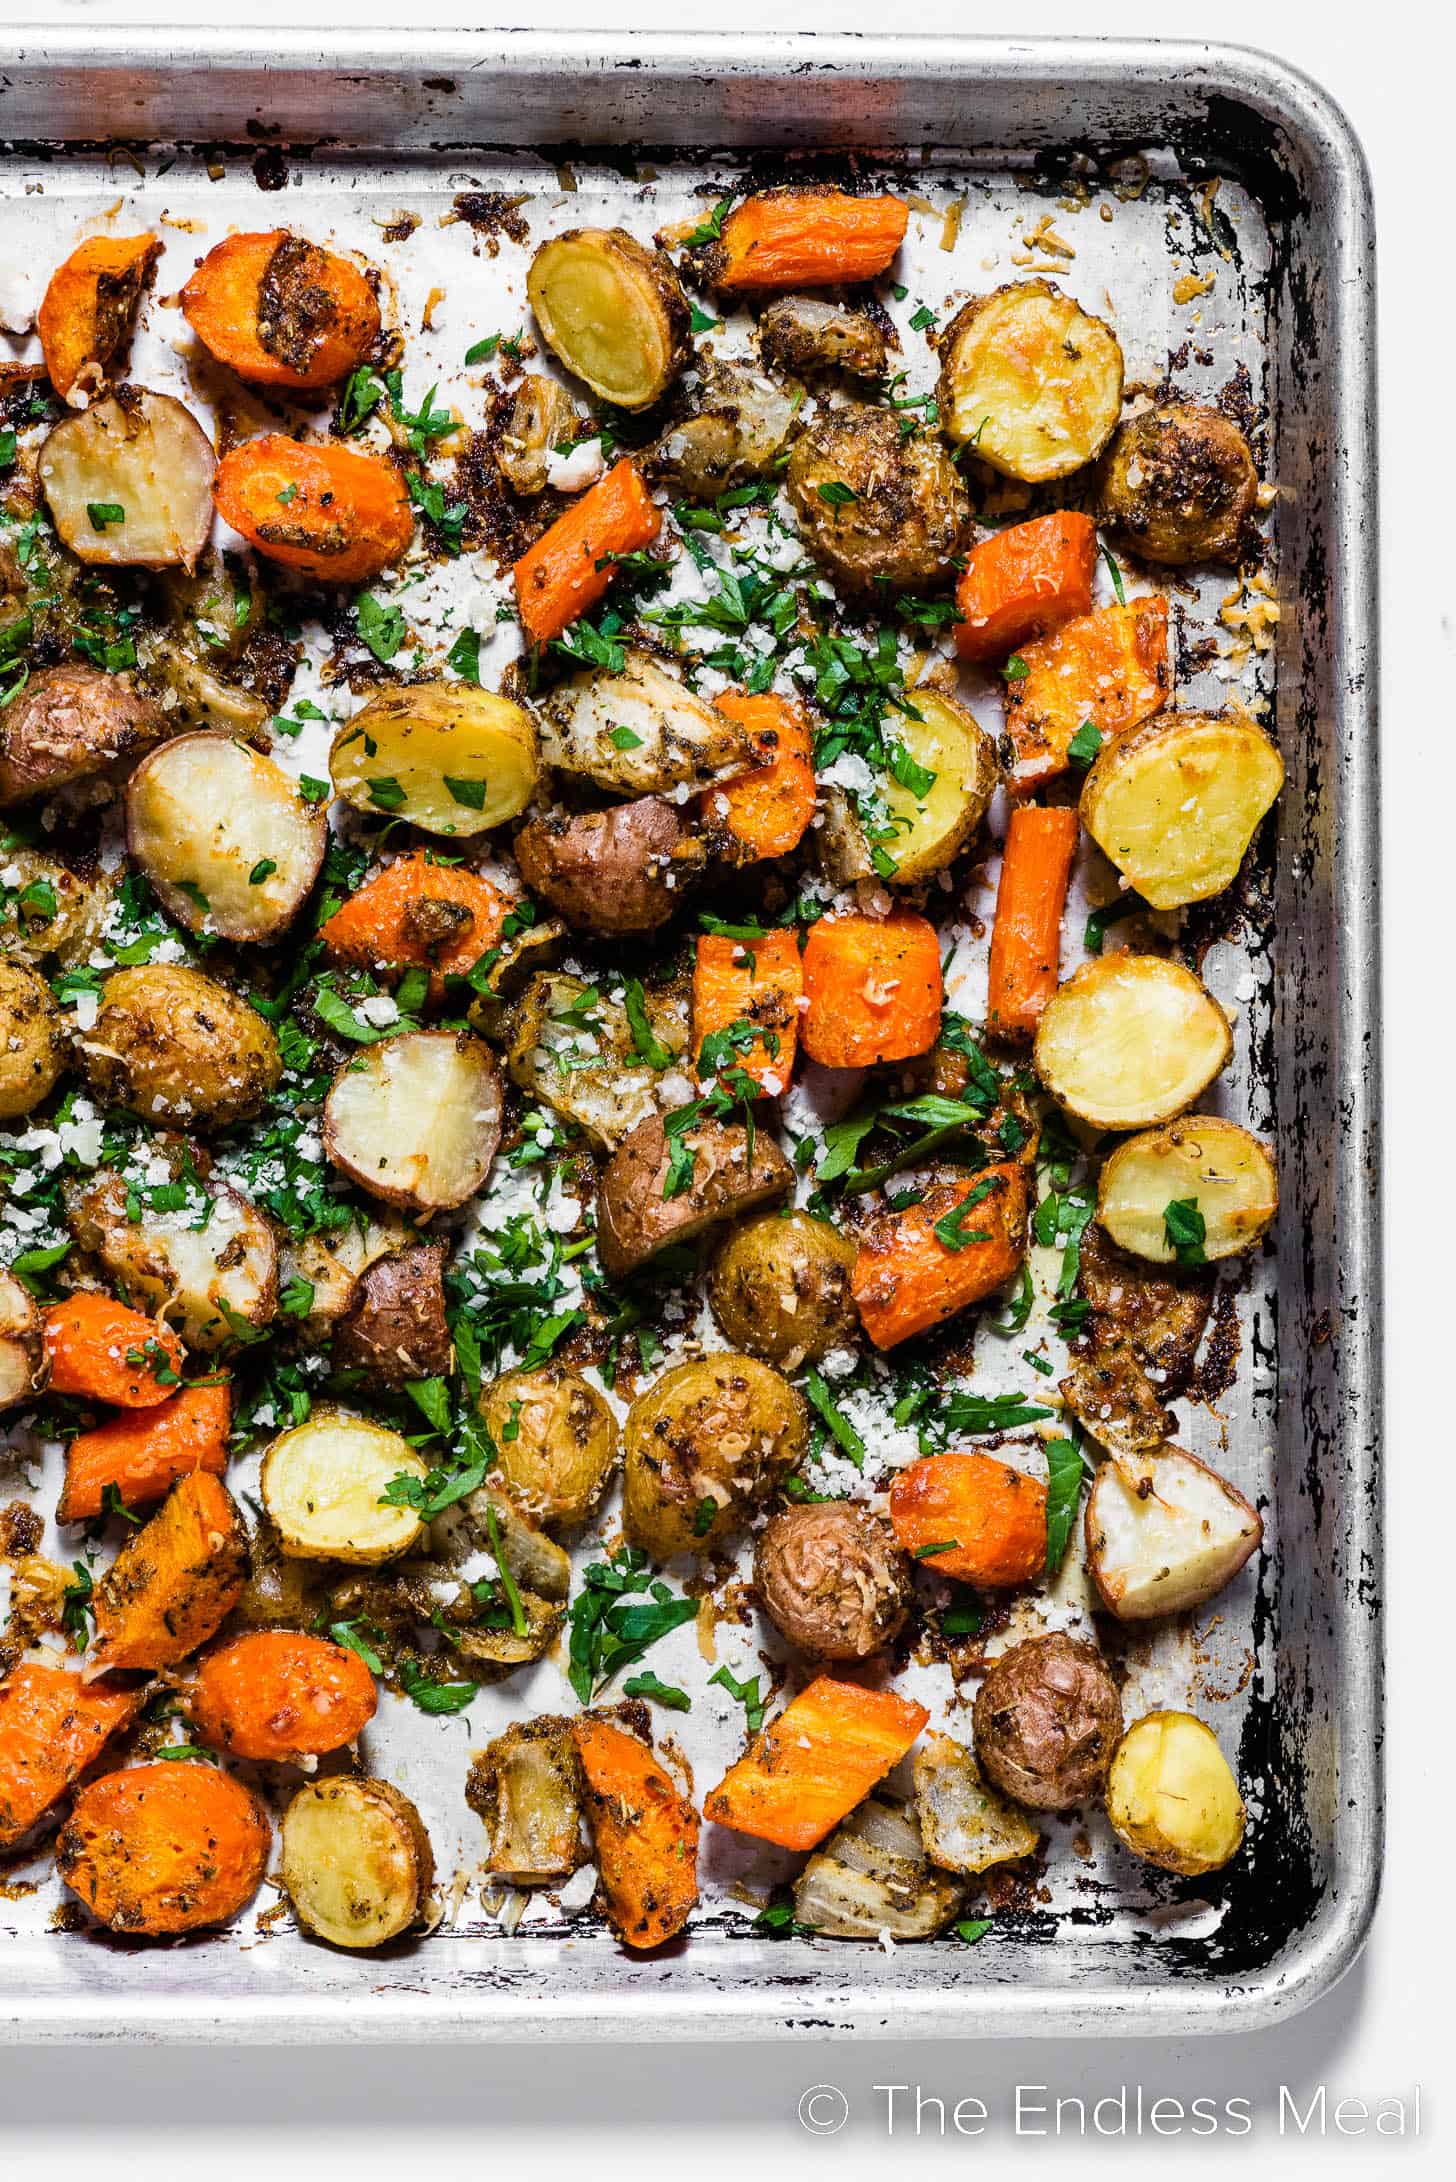 Roasted carrots, potatoes, and onions on a baking sheet